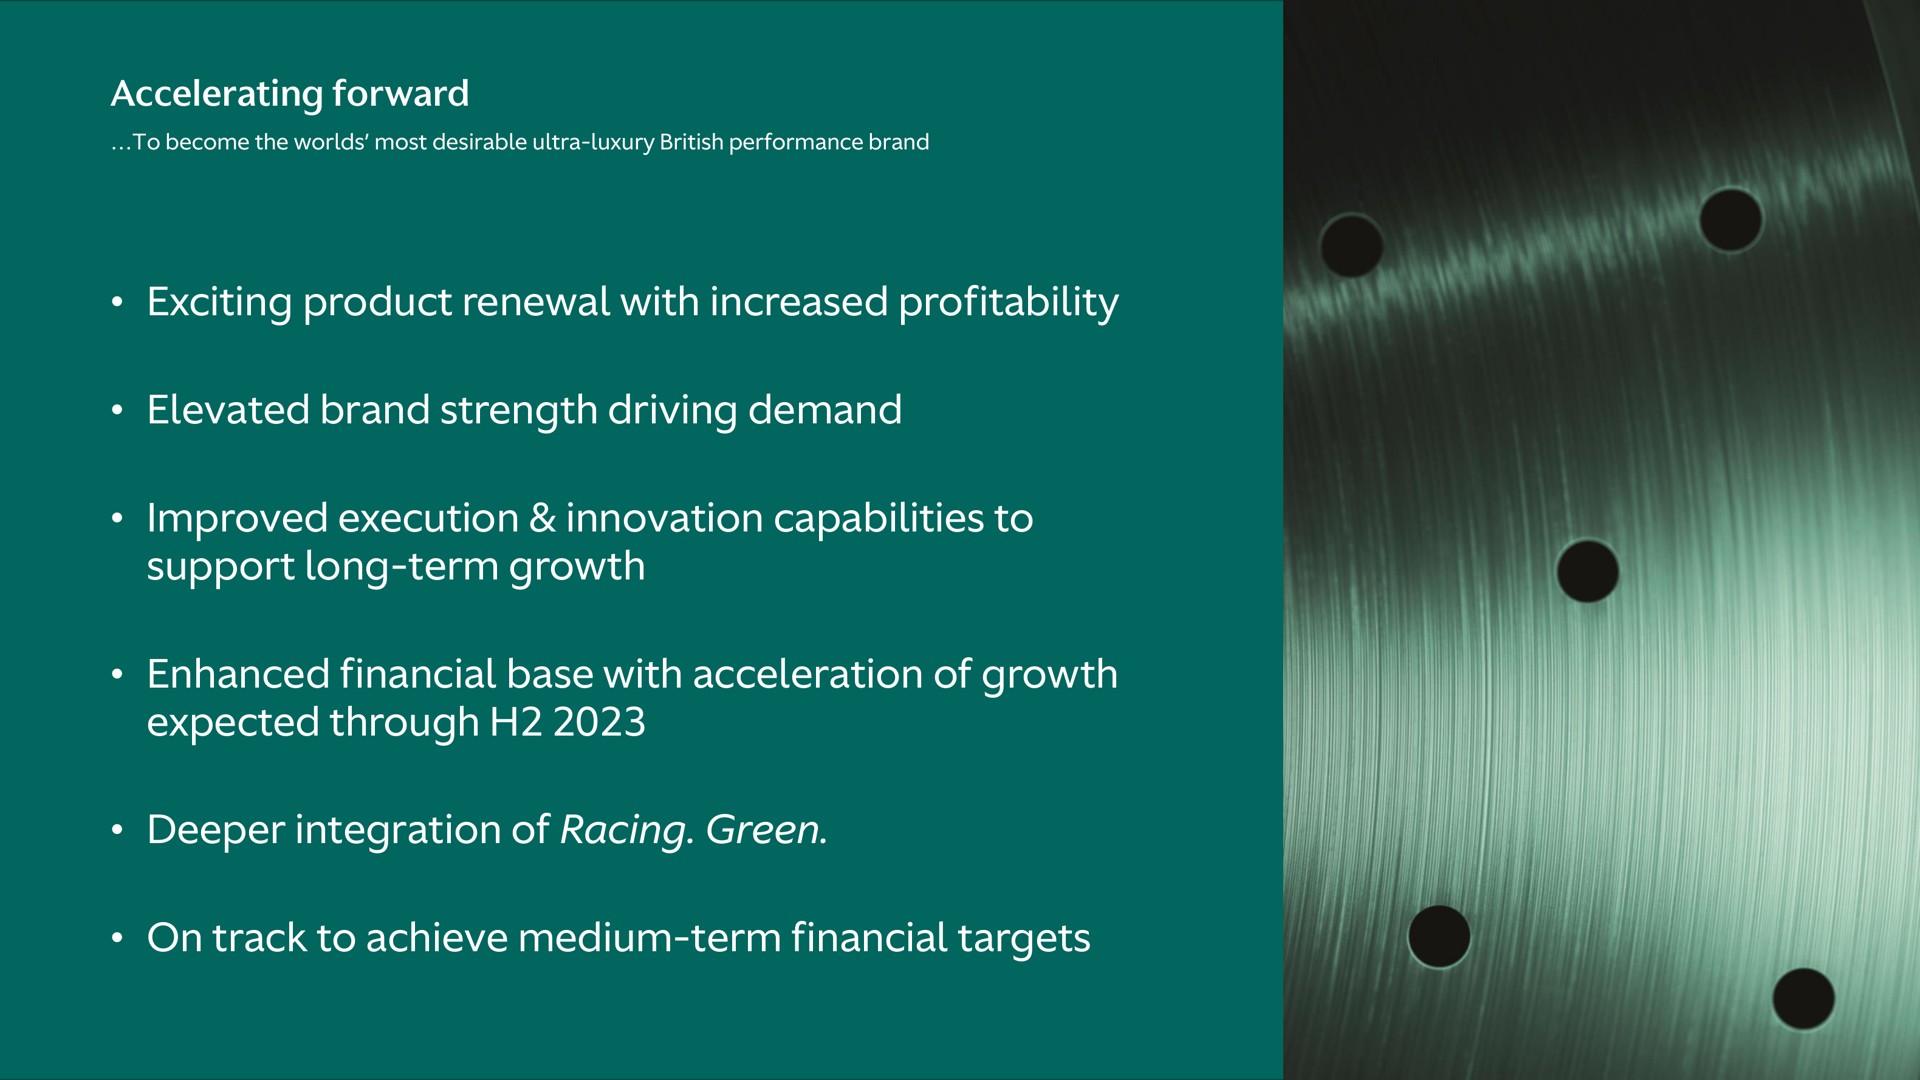 accelerating forward exciting product renewal with increased profitability elevated brand strength driving demand improved execution innovation capabilities to support long term growth enhanced financial base with acceleration of growth expected through integration of racing green on track to achieve medium term financial targets | Aston Martin Lagonda